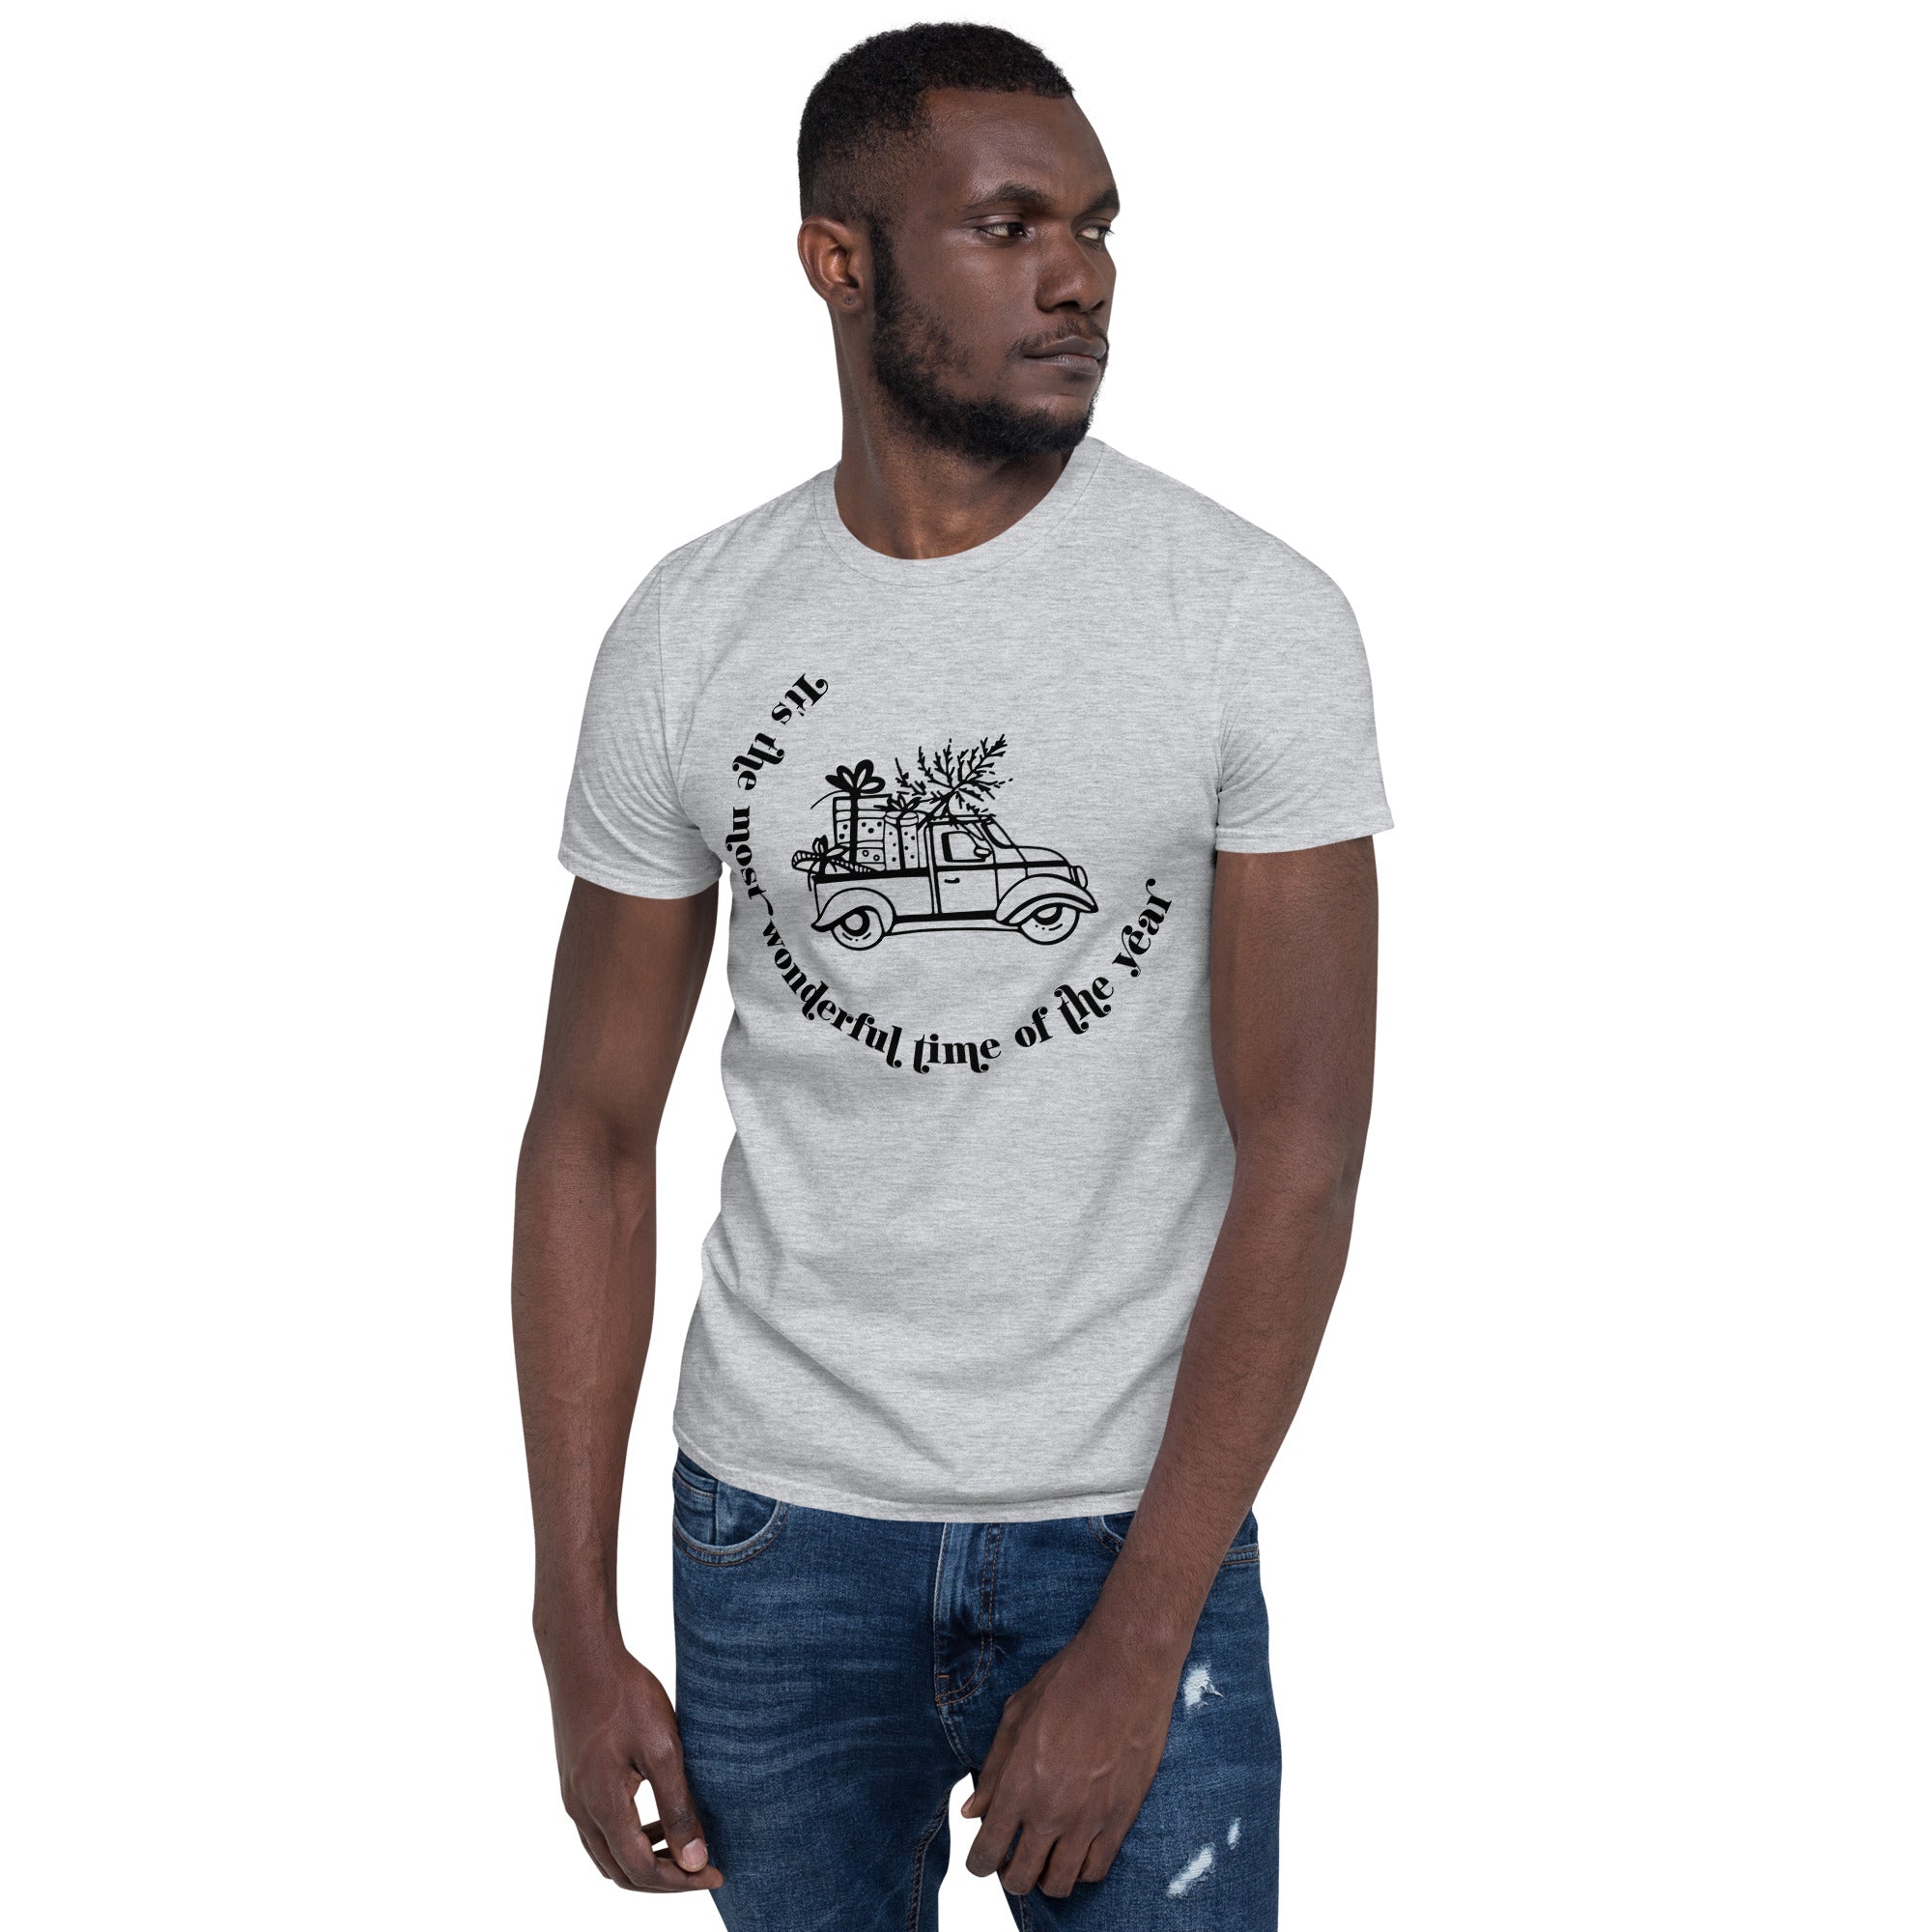 Most Wonderful Time of the Year - Short-Sleeve Unisex T-Shirt